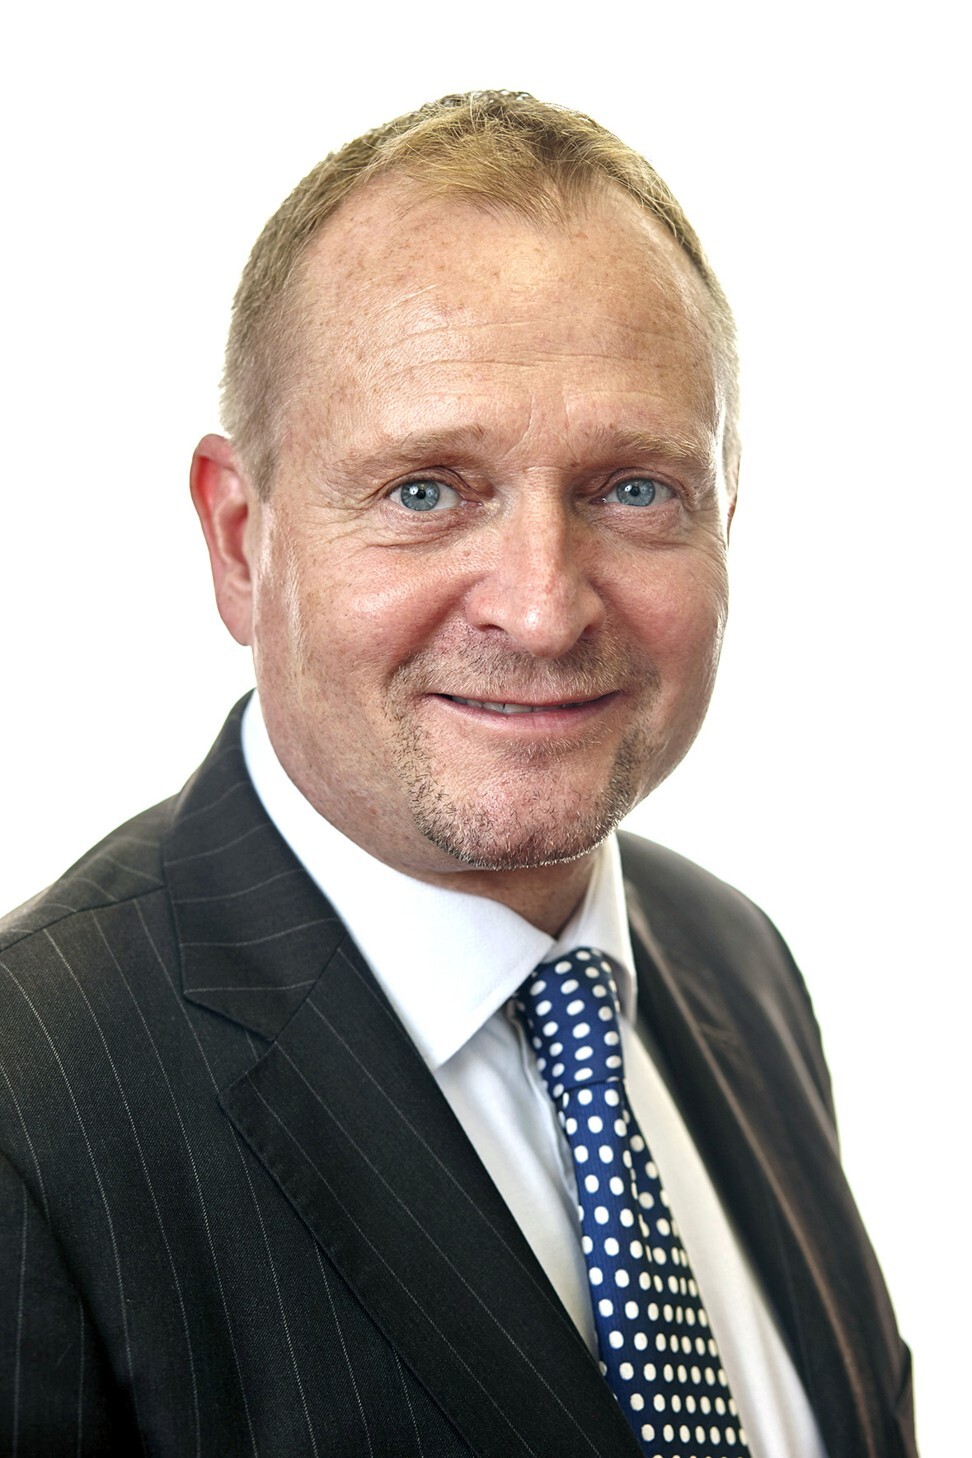 Bjorn Hojgaard is the chairman of the Hong Kong Shipowners Association and CEO of Anglo-Eastern.